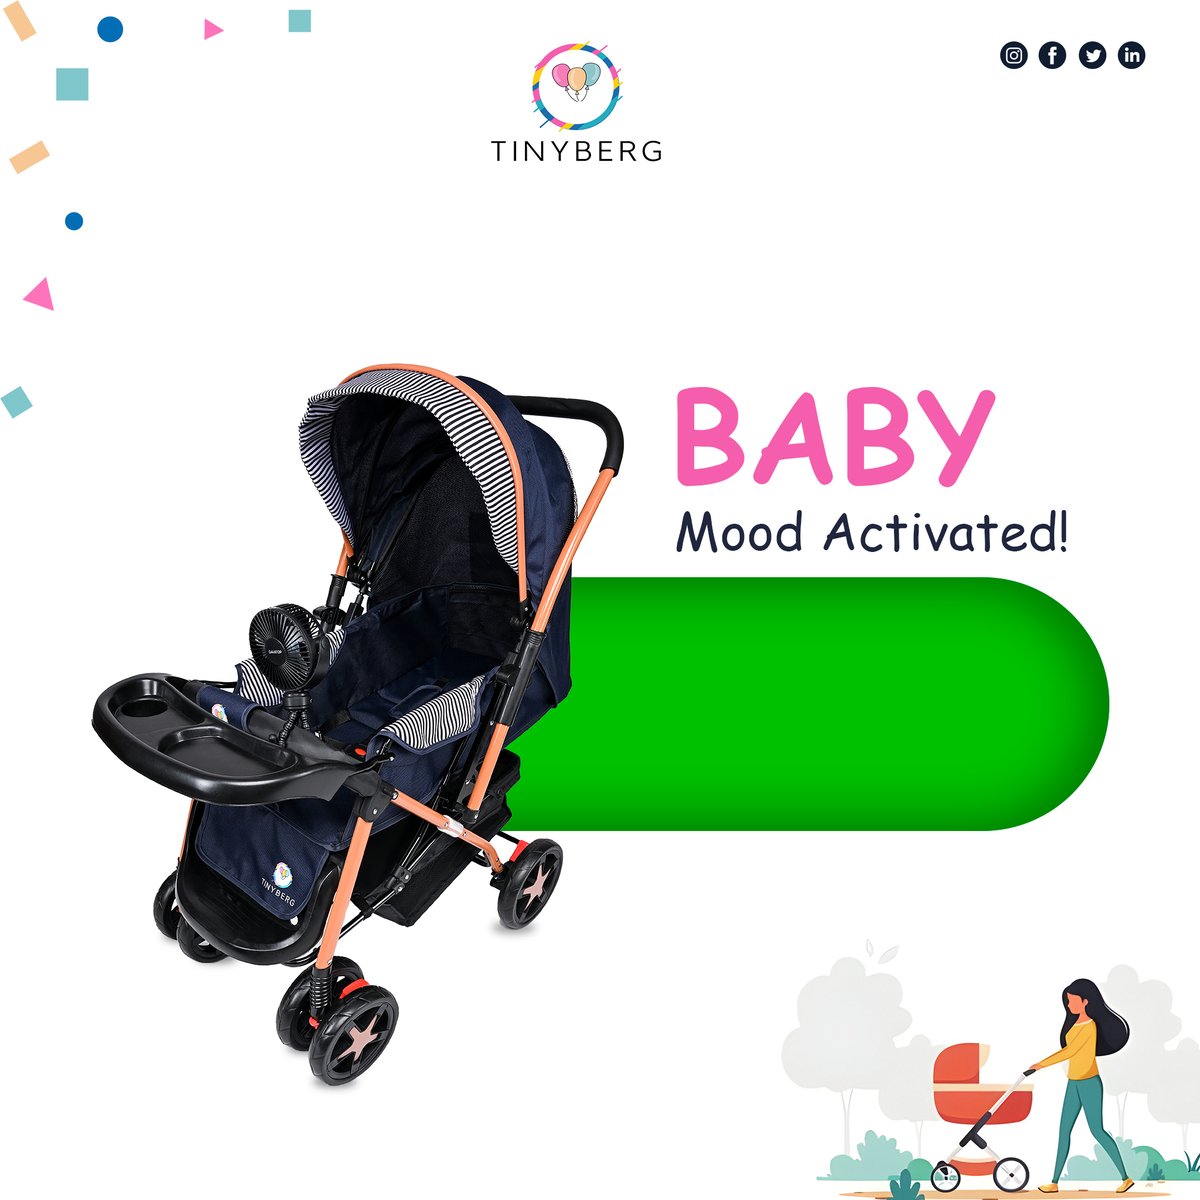 Get ready to activate the fun mode with Tiny Berg’s premium quality Baby gear.
 
#takeastroll #TinyBergBabies #BabyMustHaves #OnlineNow #babystore #babyproducts #babyessentials #babygear